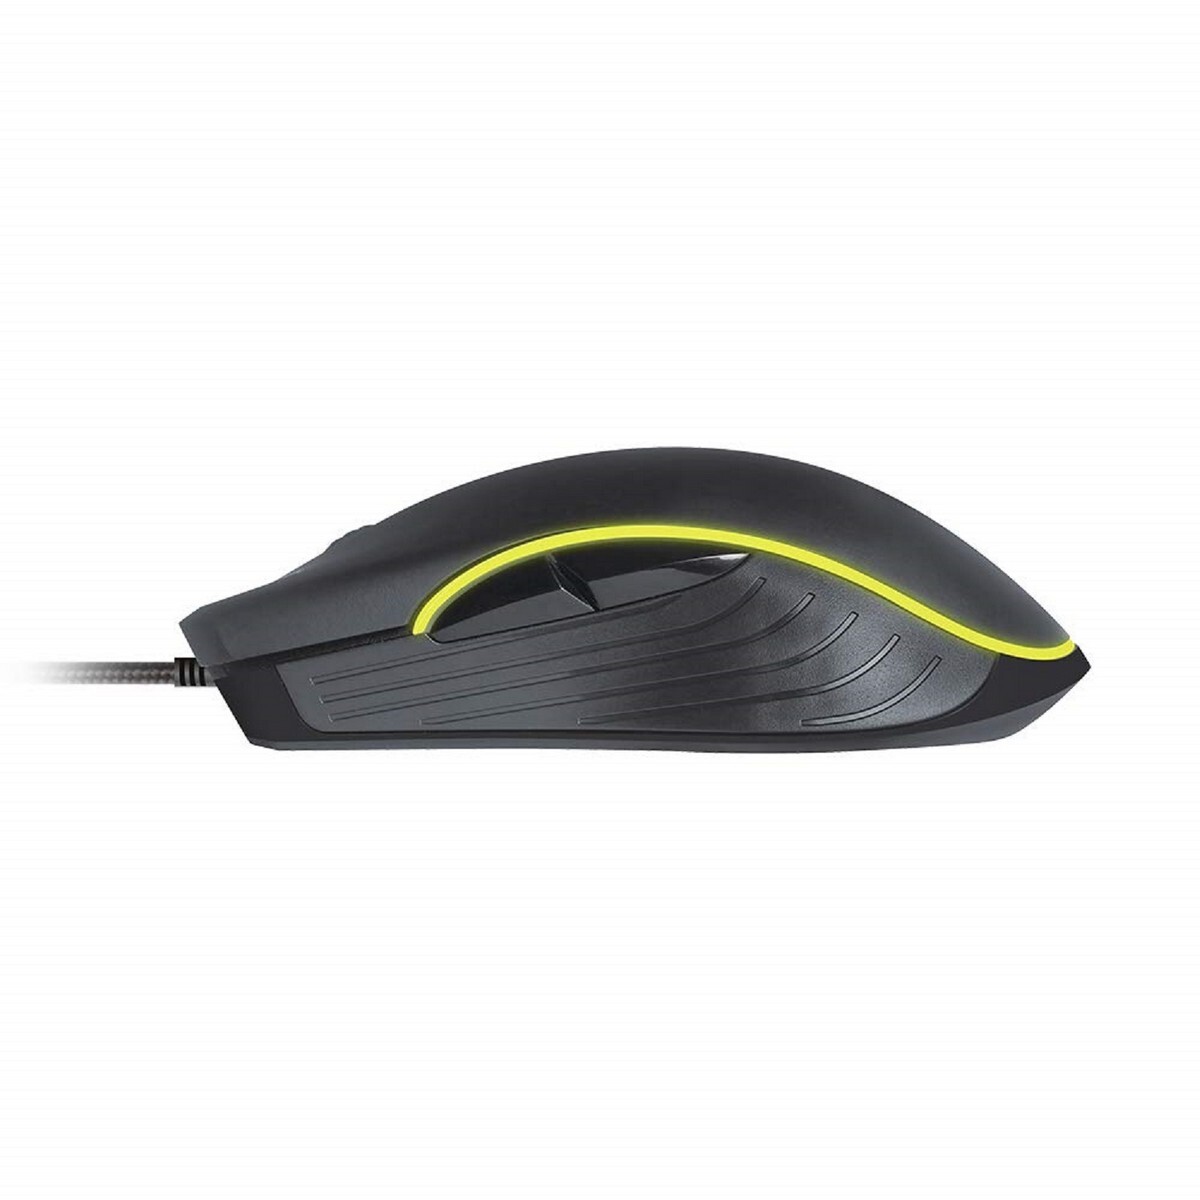 Redgear Gaming Mouse A-20 Black